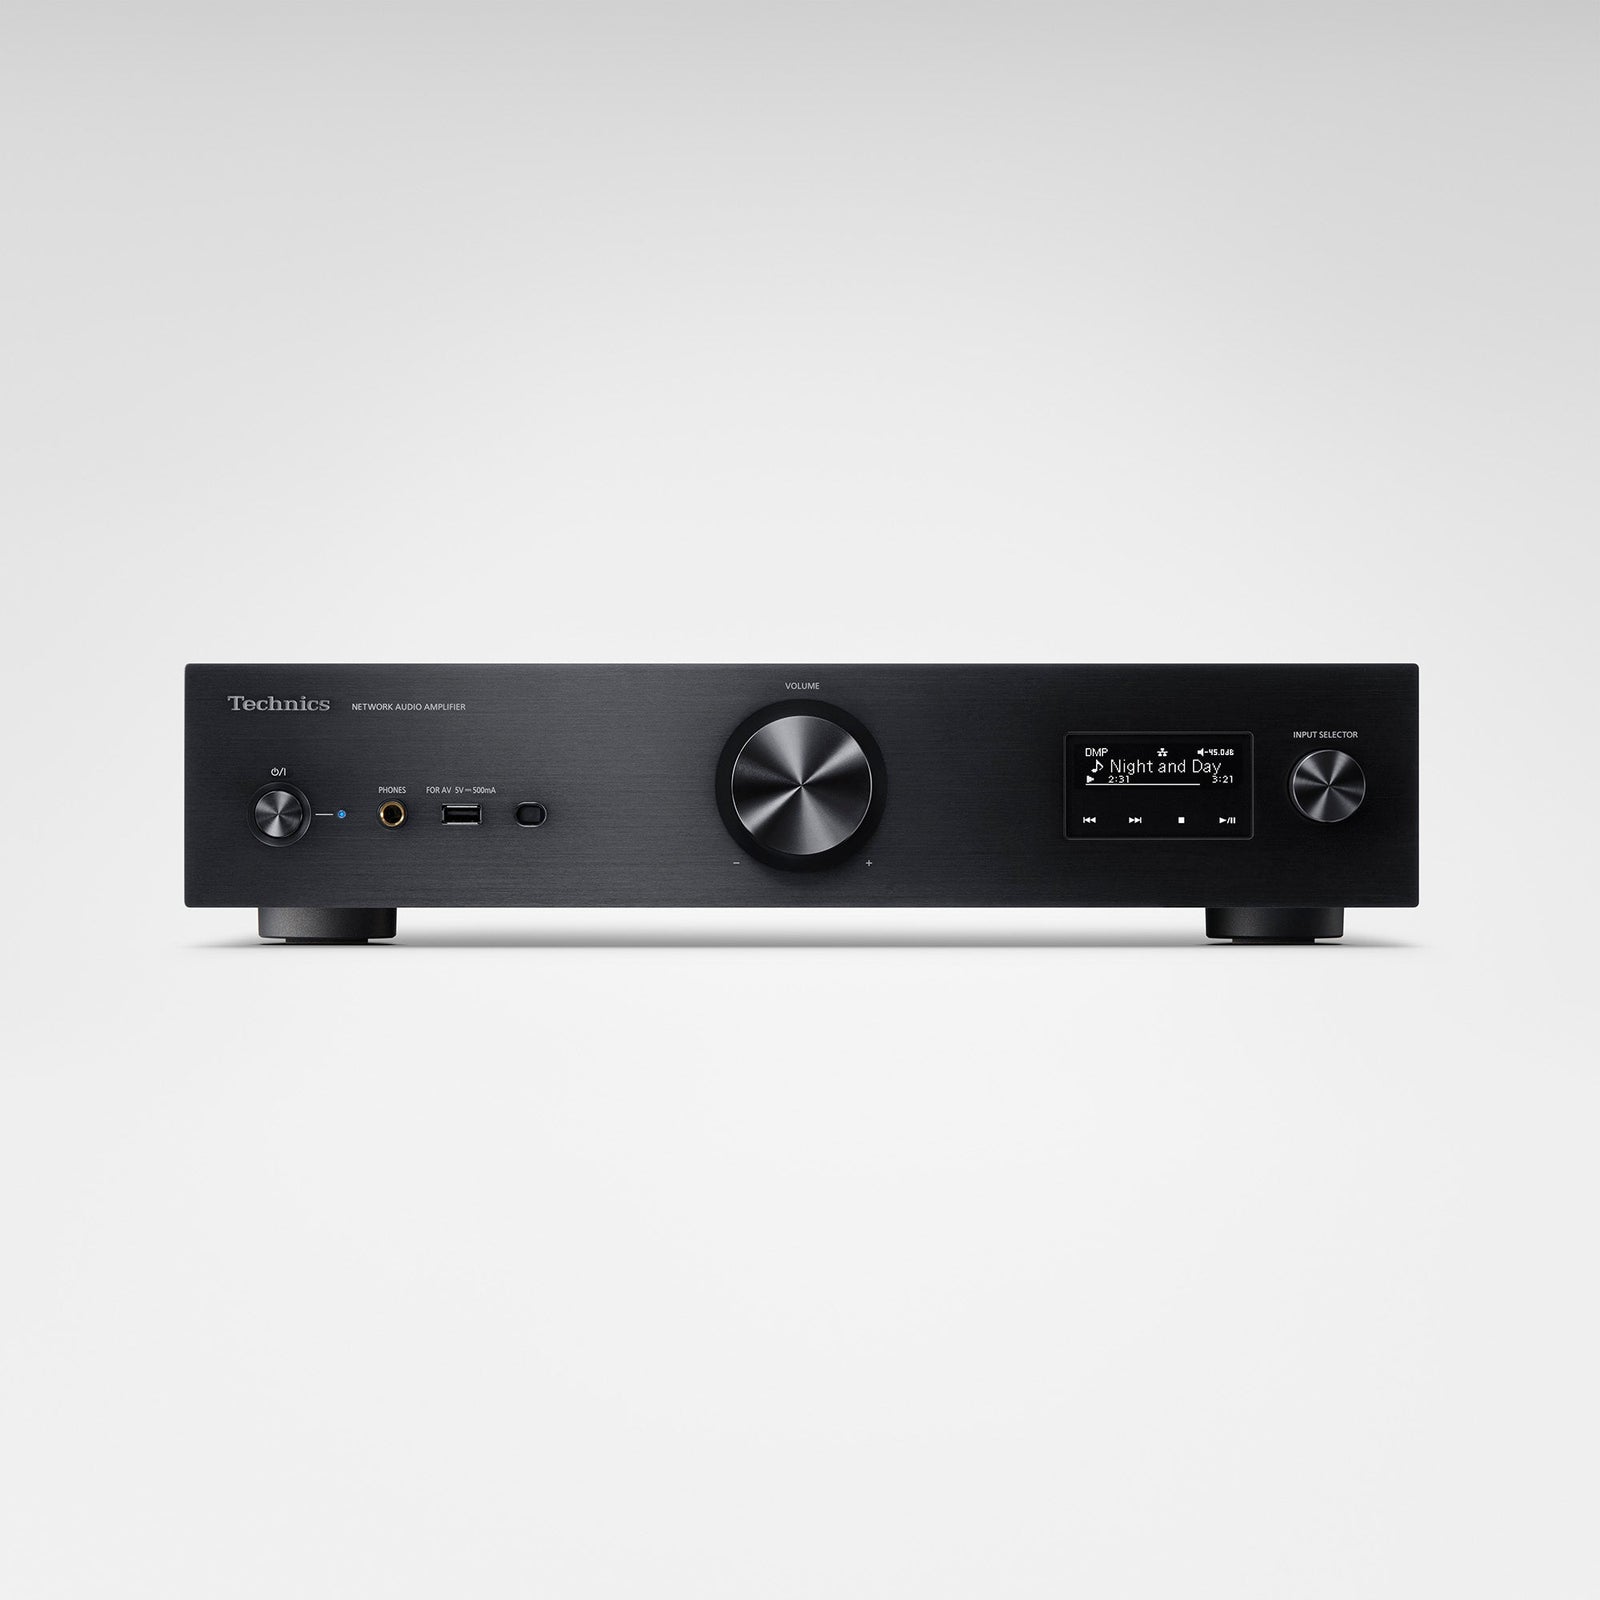 TECHNICS SUGX70 NETWORK AUDIO AMPLIFIER | VINYL SOUND The definitive living room audio center that enables seamless enjoyment of video, audio, and music through next-level integration using Technics’ full digital technologies. A heavily featured streaming amplifier that combines the sonic genes of Technics Grand Class components with a wealth of source functions, including video connectivity.